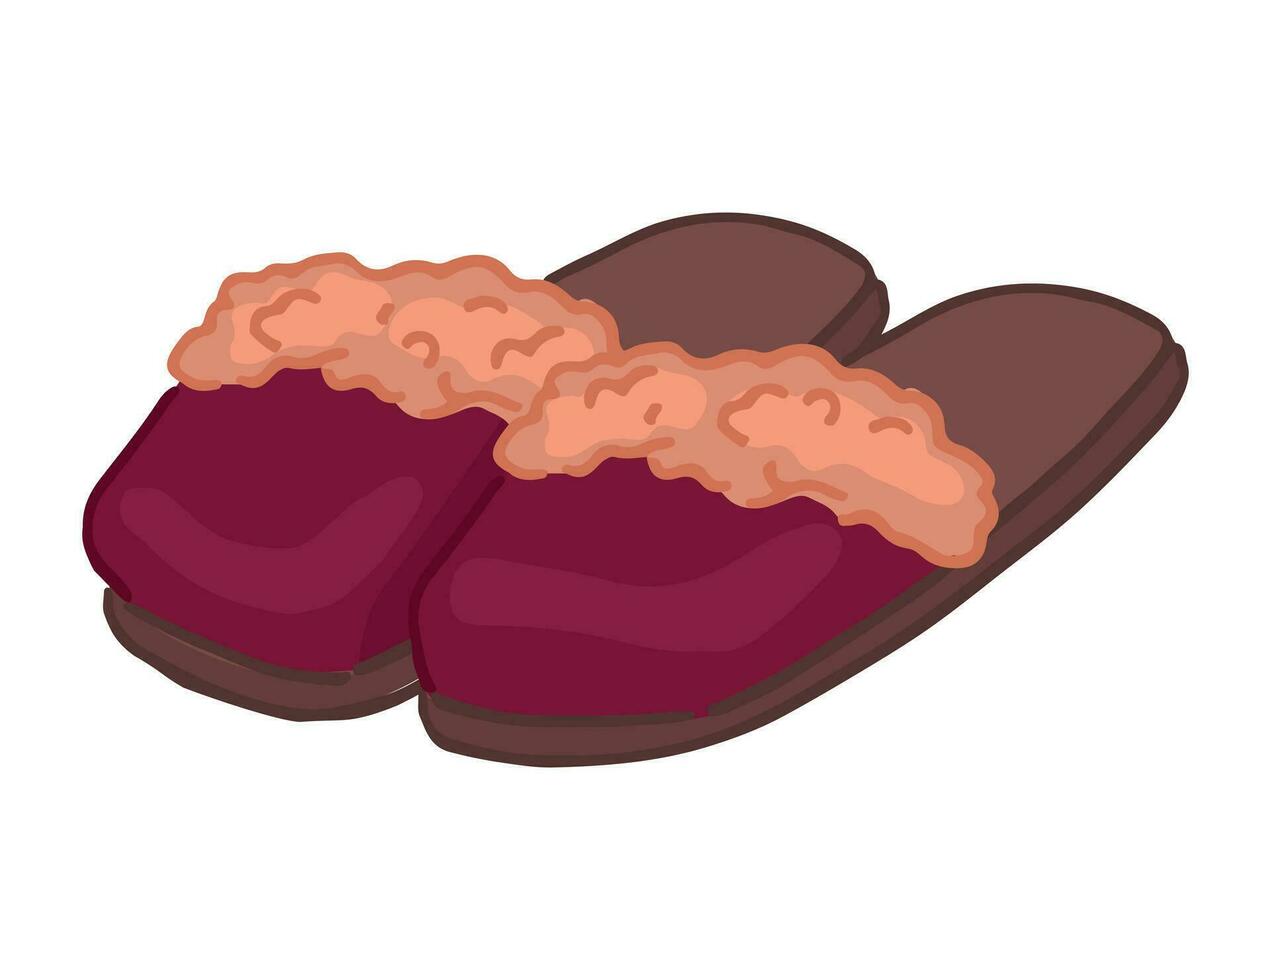 Doodle of warm winter home slippers. Cartoon clipart of pair of furry footwear for house. Vector illustration isolated on white background.